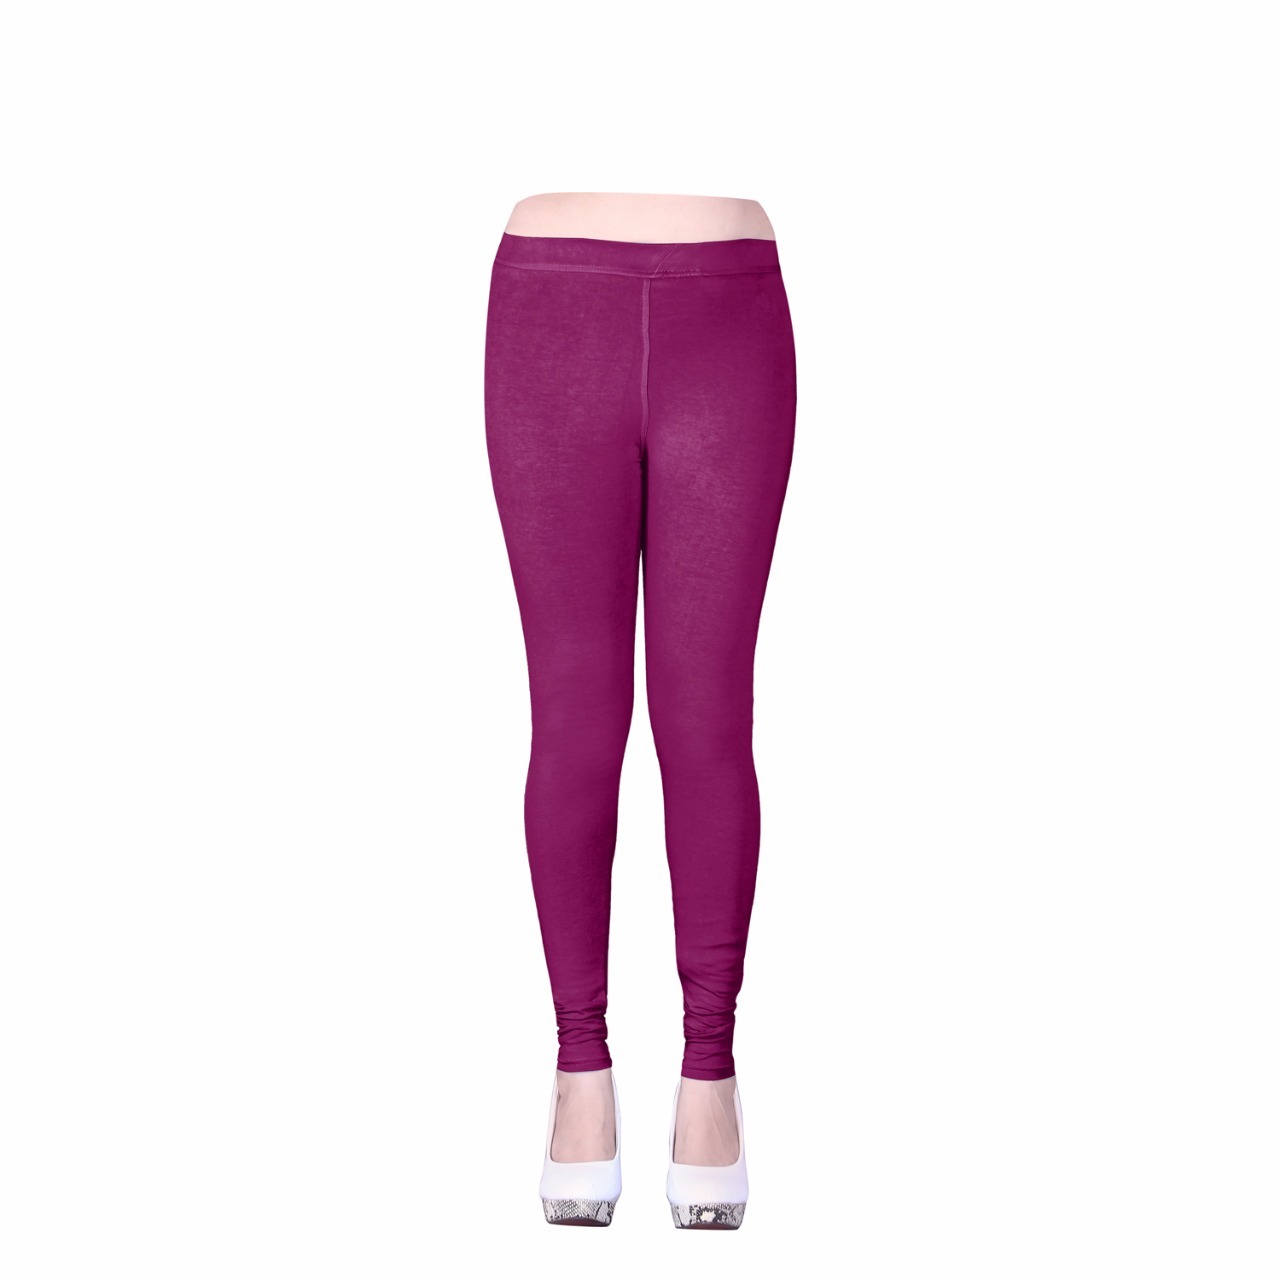 Trifoi Strethable leggings with 1 month after use warranty